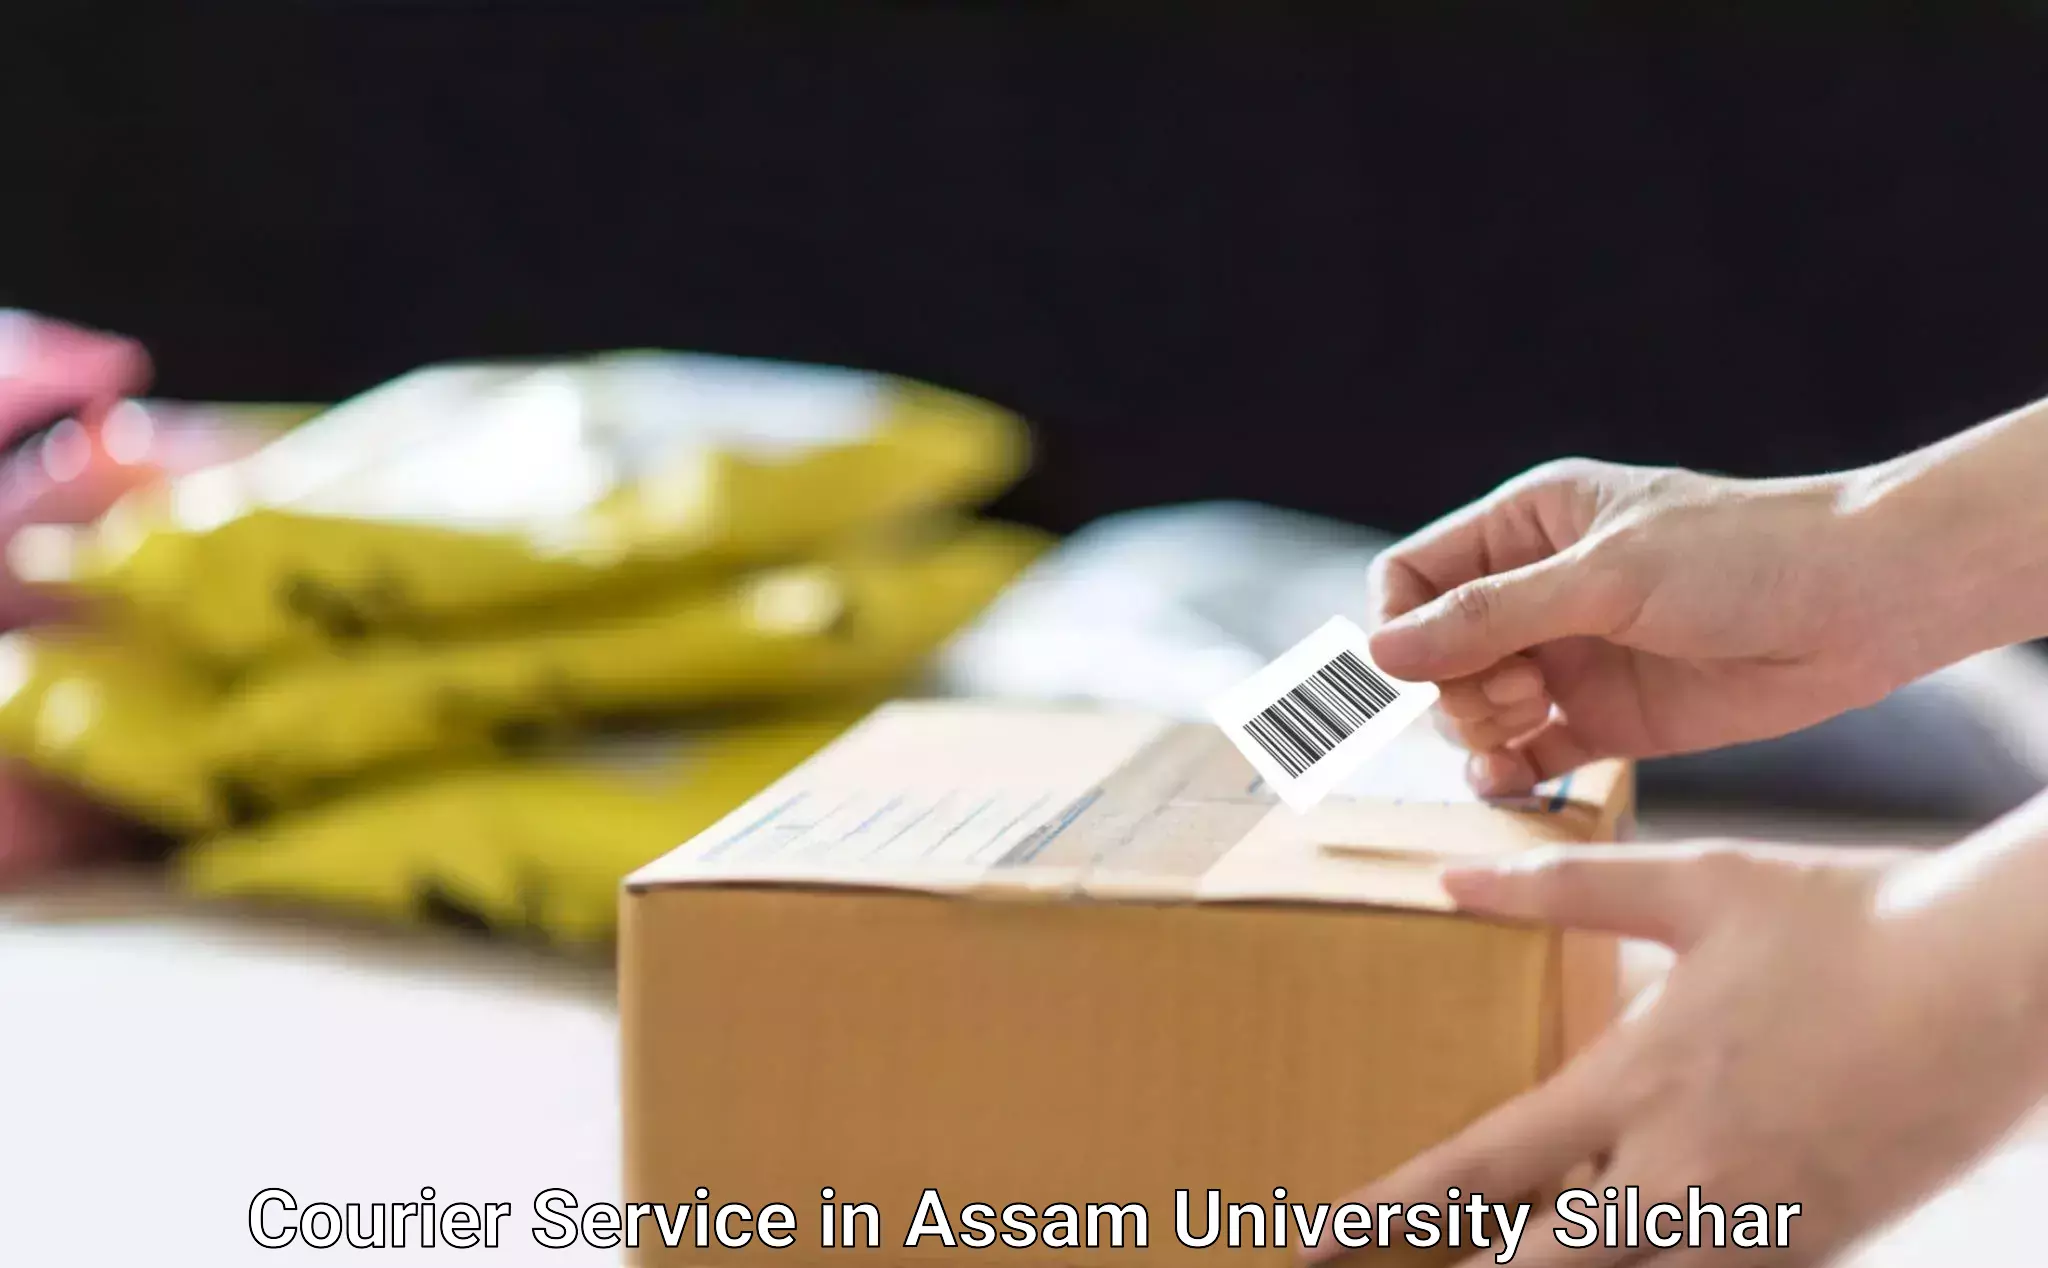 Secure freight services in Assam University Silchar